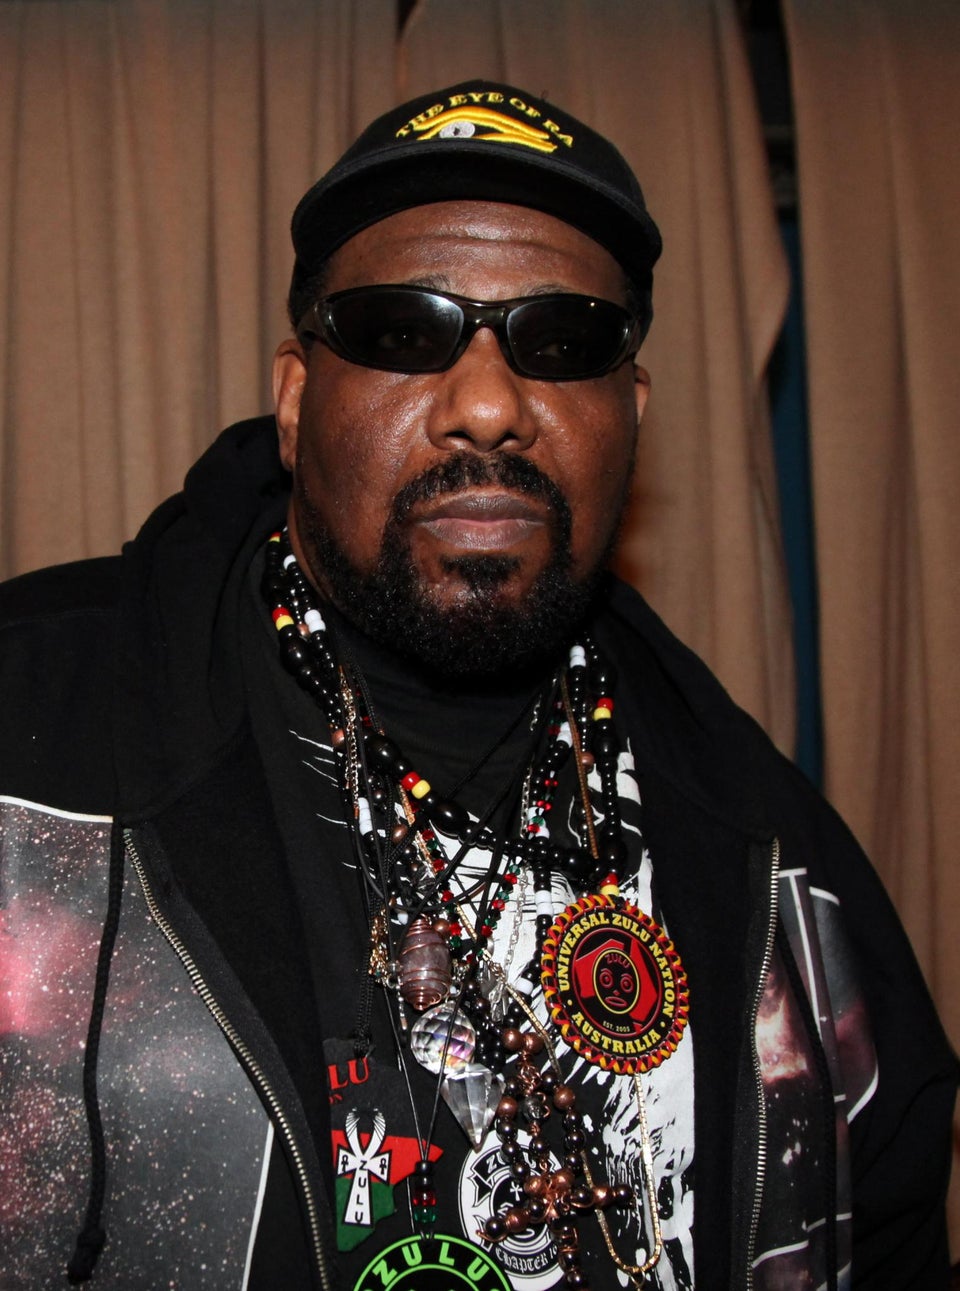 Four Alleged Sexual Abuse Victims Come Forward Against Hip Hop Pioneer Afrika Bambaataa